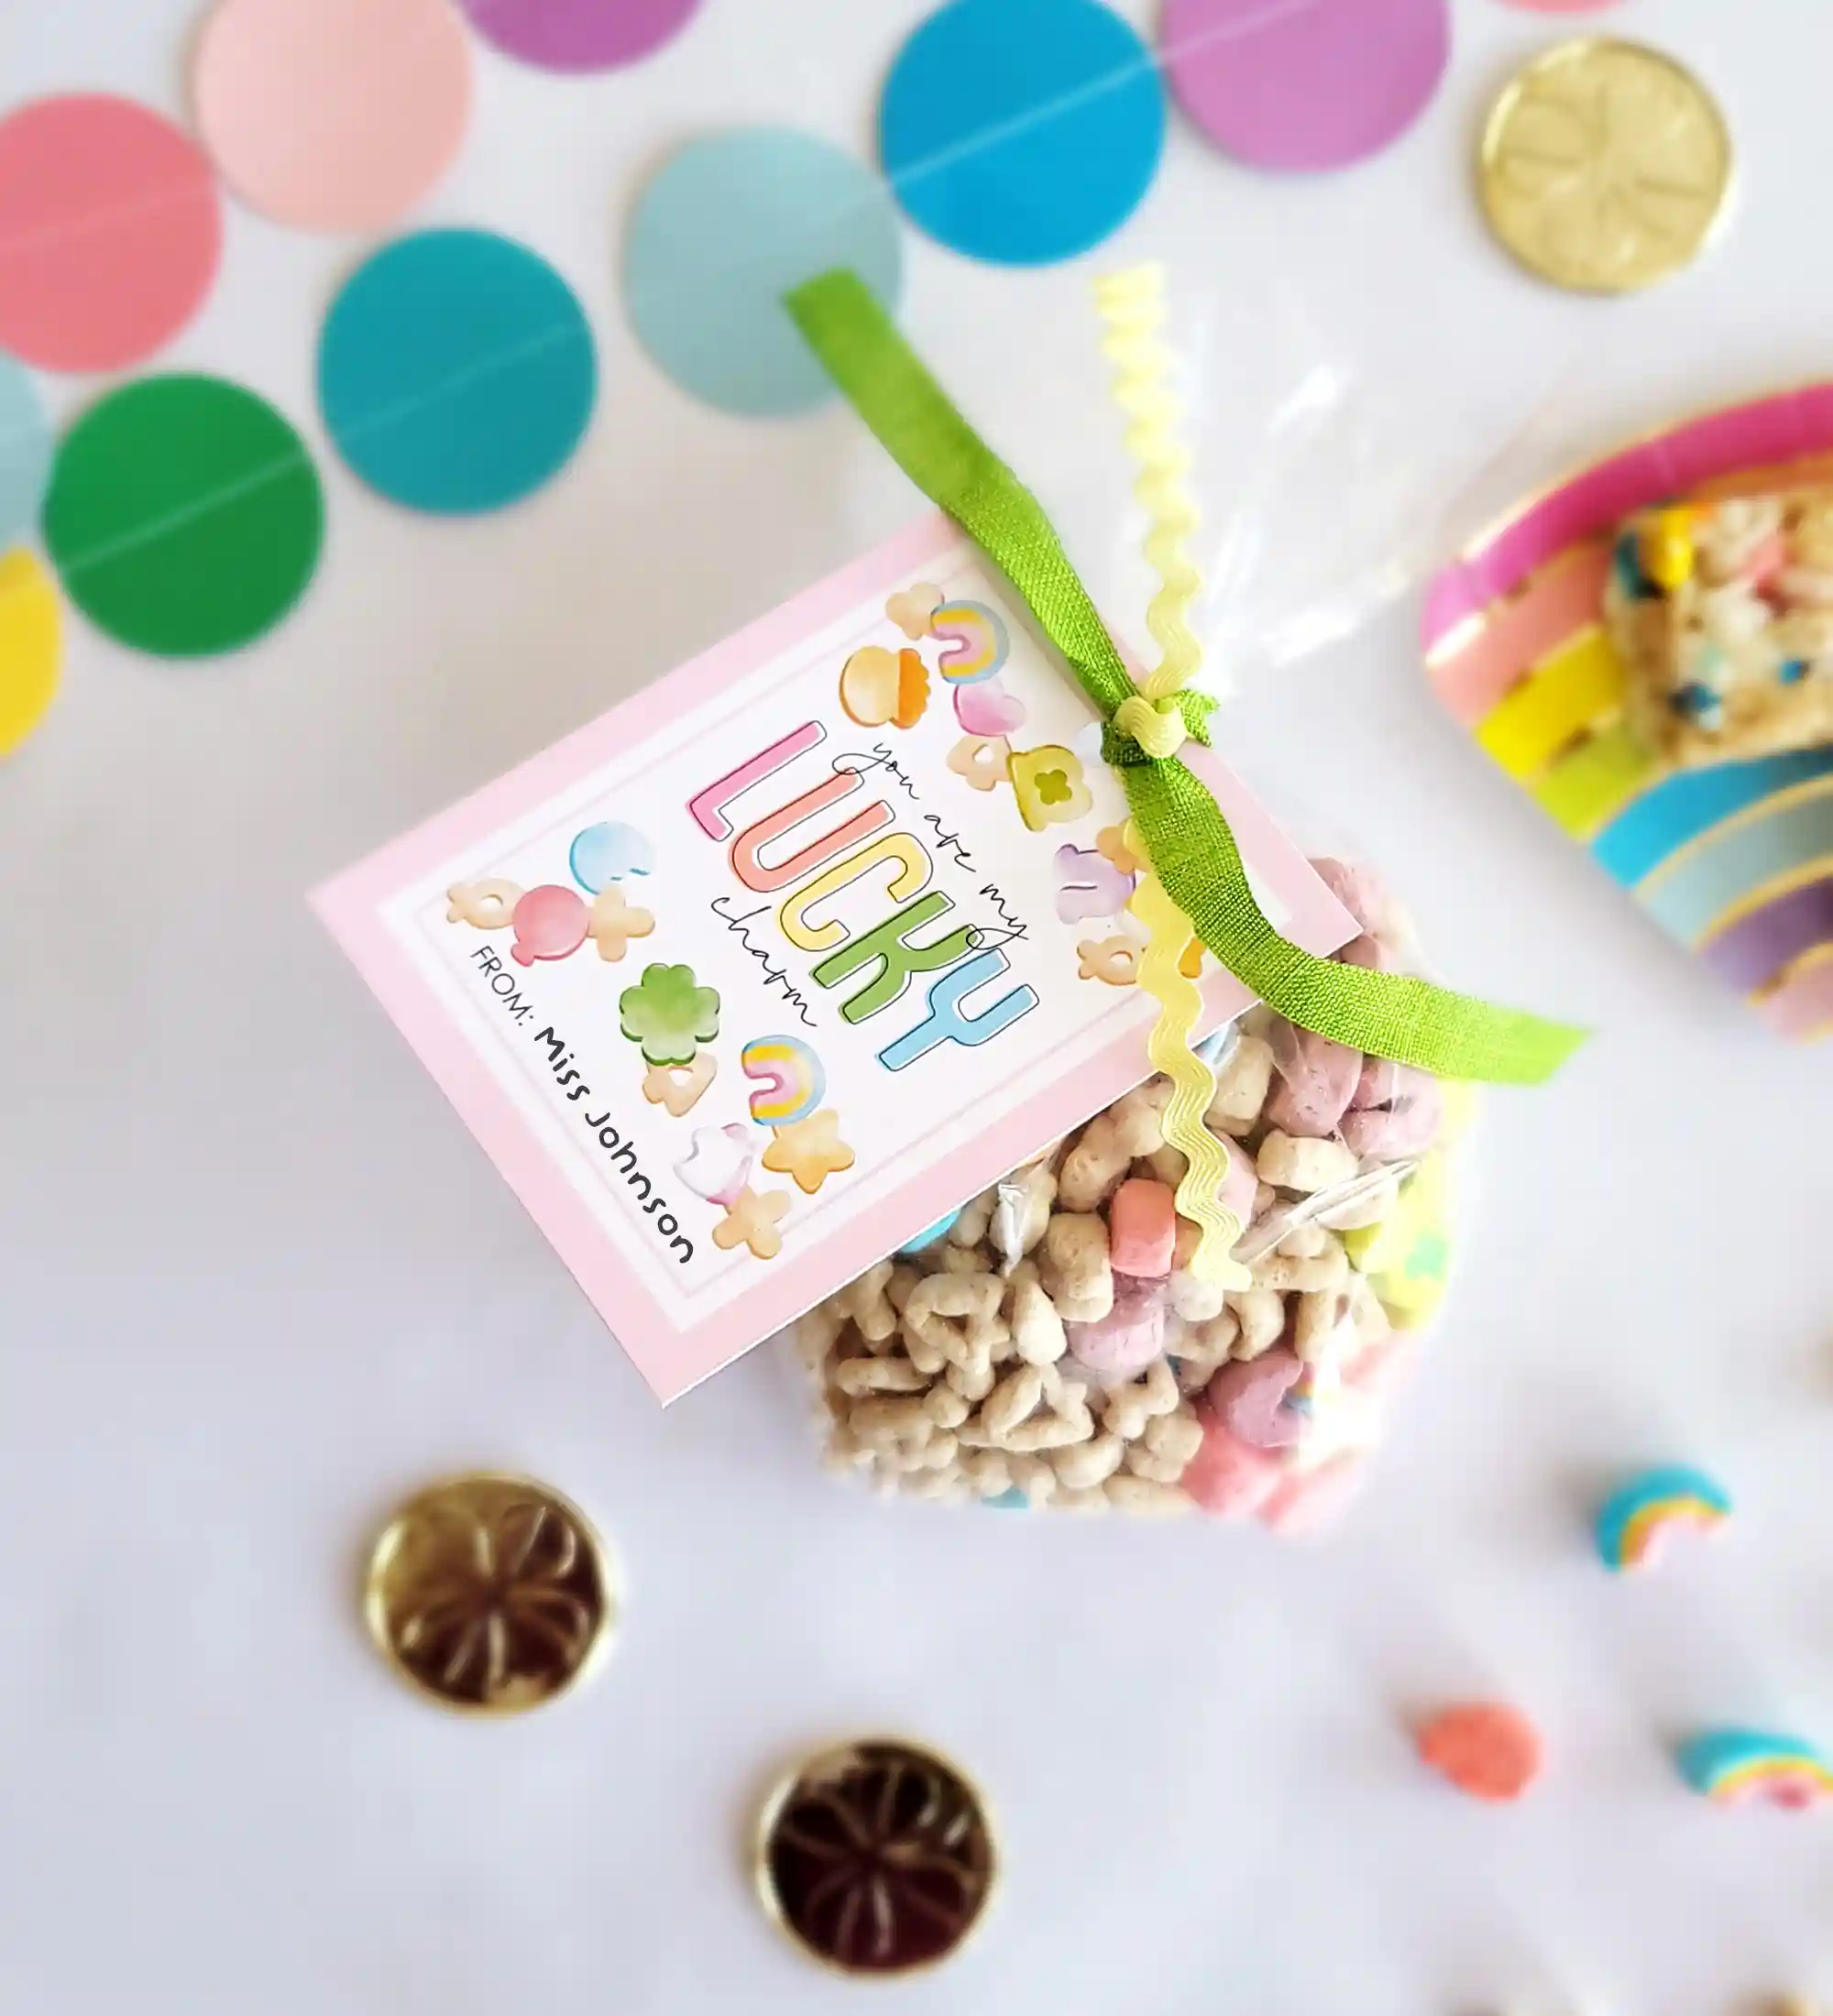 Printable St. Patrick's Day gift tag for a fun and easy gift for St. Patrick's Day. Gfit tag says: You are my lucky charm! Attach gift tag to a box of Lucky Charms, a St. Patrick's Day themed treat, or a small toy!